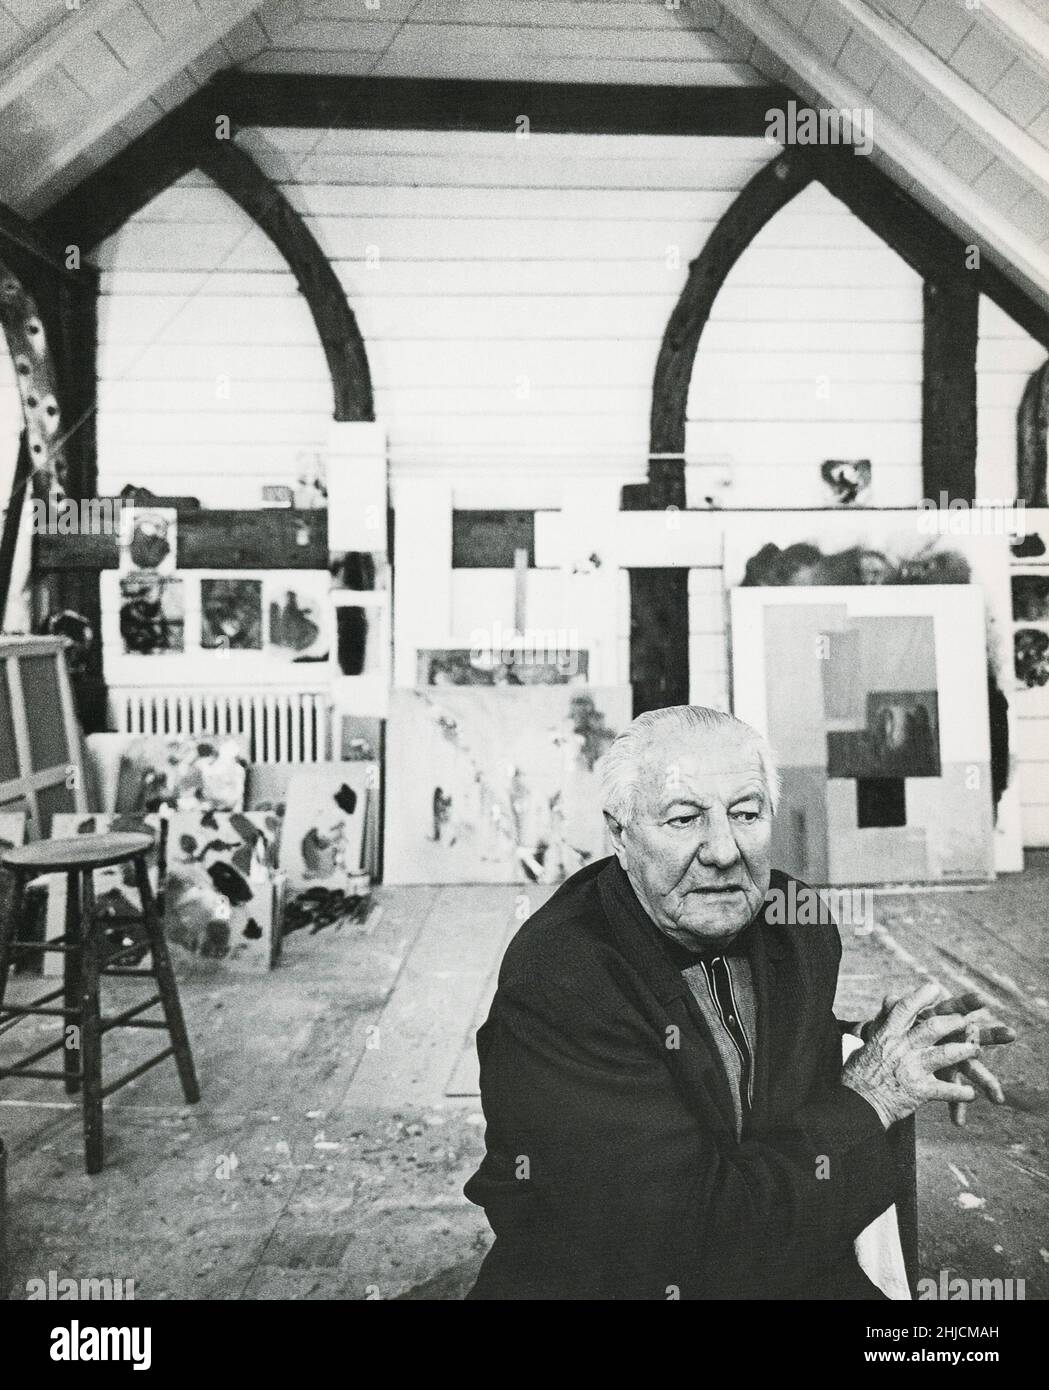 Hans Hofmann (1880-1966) in Provincetown, Massachusetts, 1963. Hofmann was a German-born American abstract expressionist painter, who was a mentor and teacher to many abstract expressionist artists, including Lee Krasner and Joan Mitchell. Stock Photo